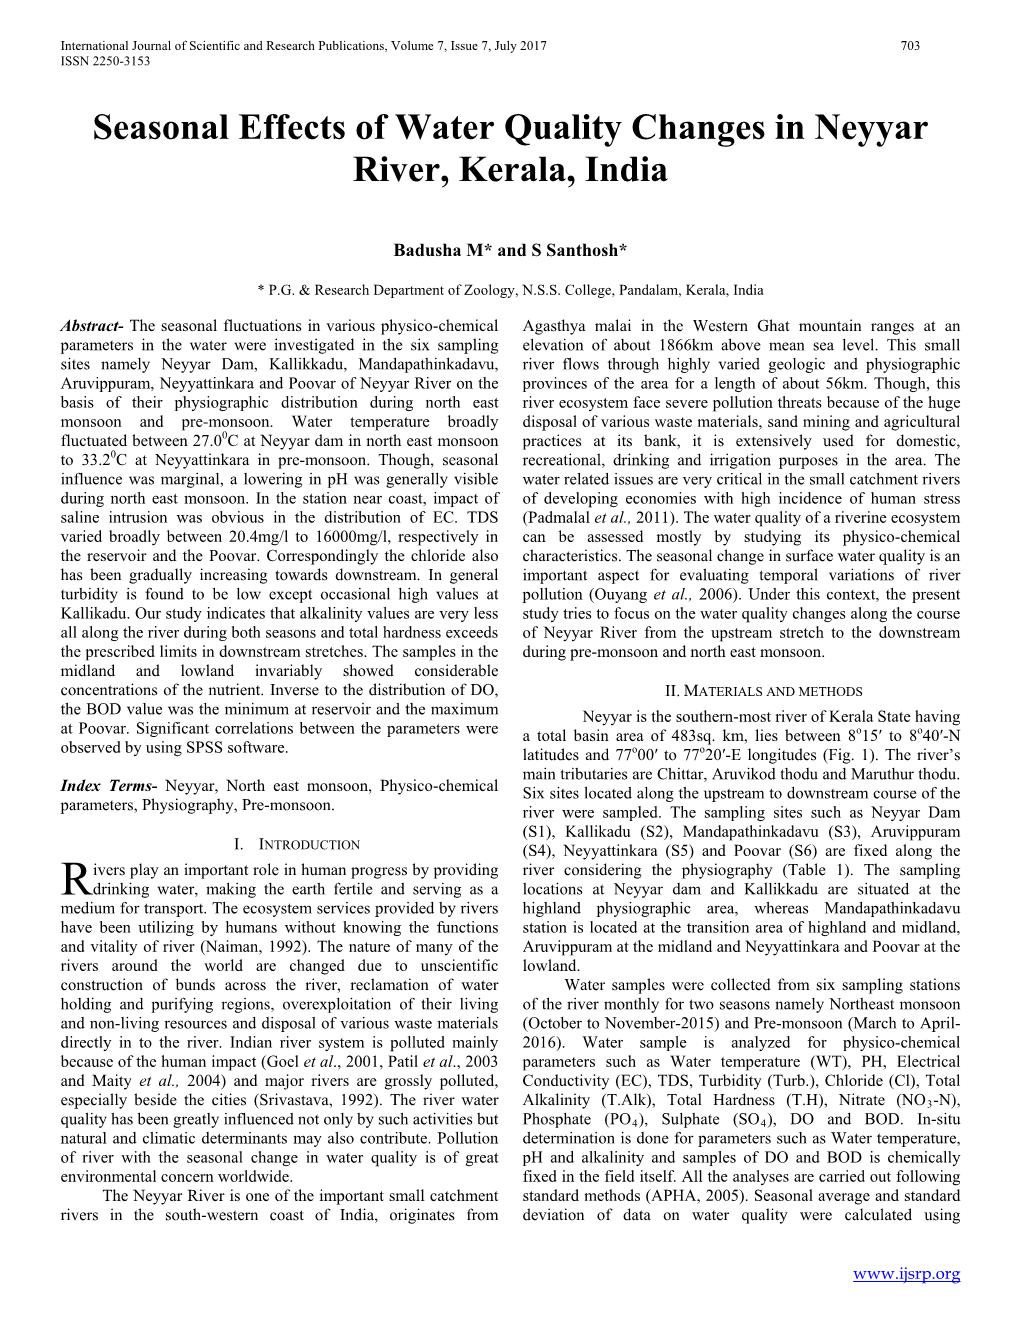 Seasonal Effects of Water Quality Changes in Neyyar River, Kerala, India